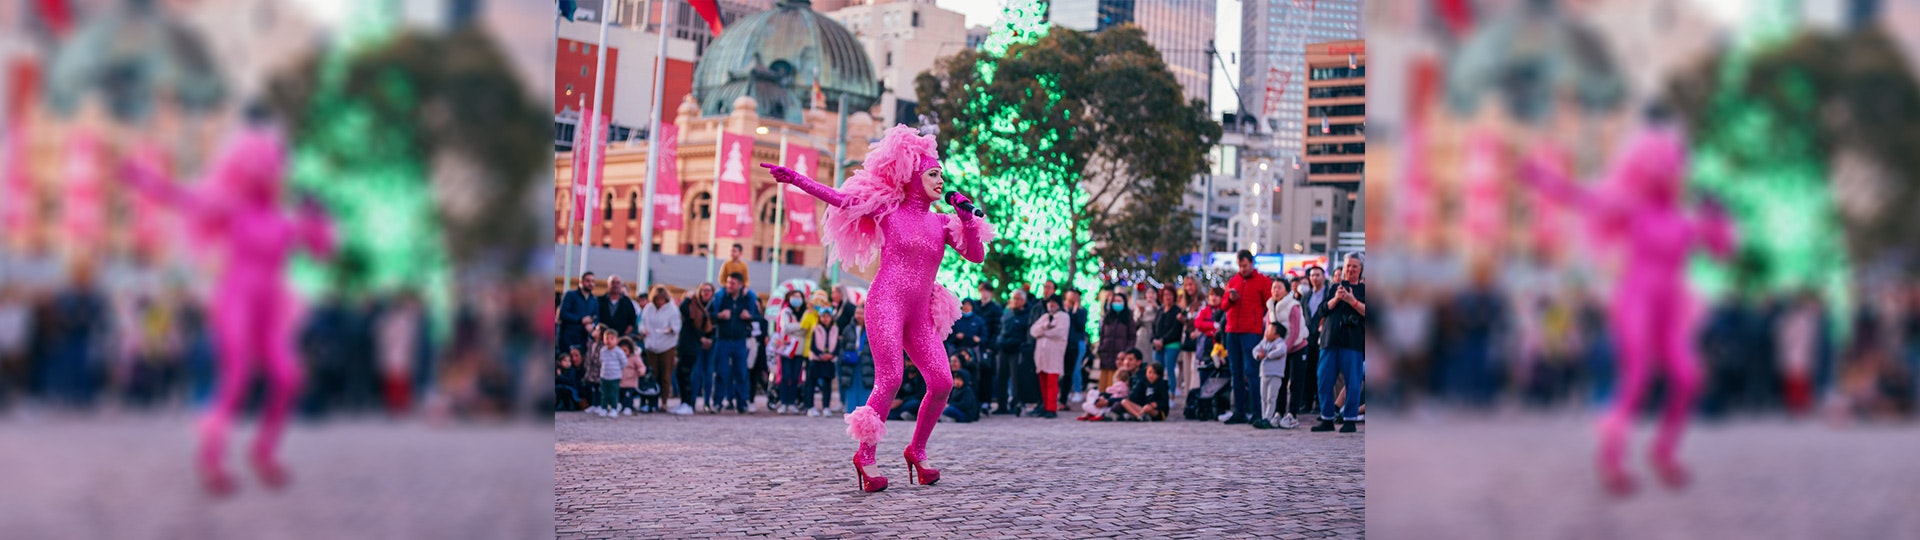 A performer dressed head to toe in bright pink sequins with Flinders St Station and a bright green lit up Christmas tree, on the ground at Fed Square singing